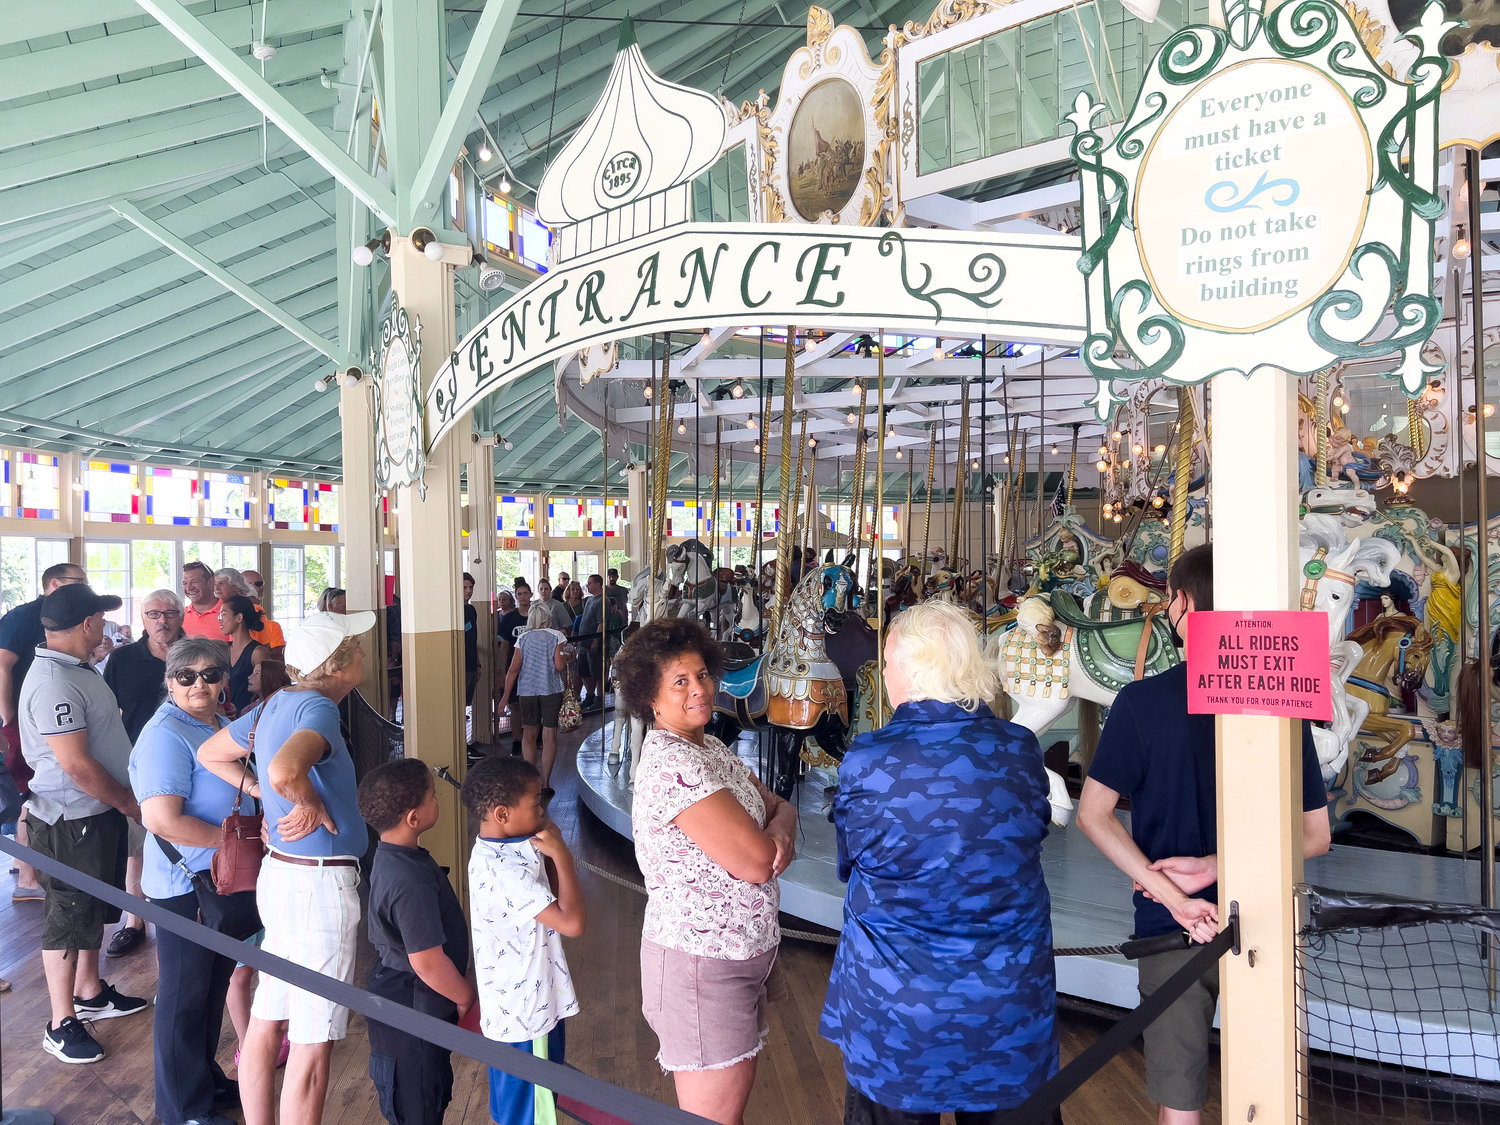 The historic Charles D. Looff Carousel at Crescent Park, which only reopened the week prior after some three years of renovations, was bustling with patrons during the 2022 edition of the namesake East Providence Arts Council festival on Saturday, Aug. 13. The carousel, operating at limited capacity, will remain open into October.